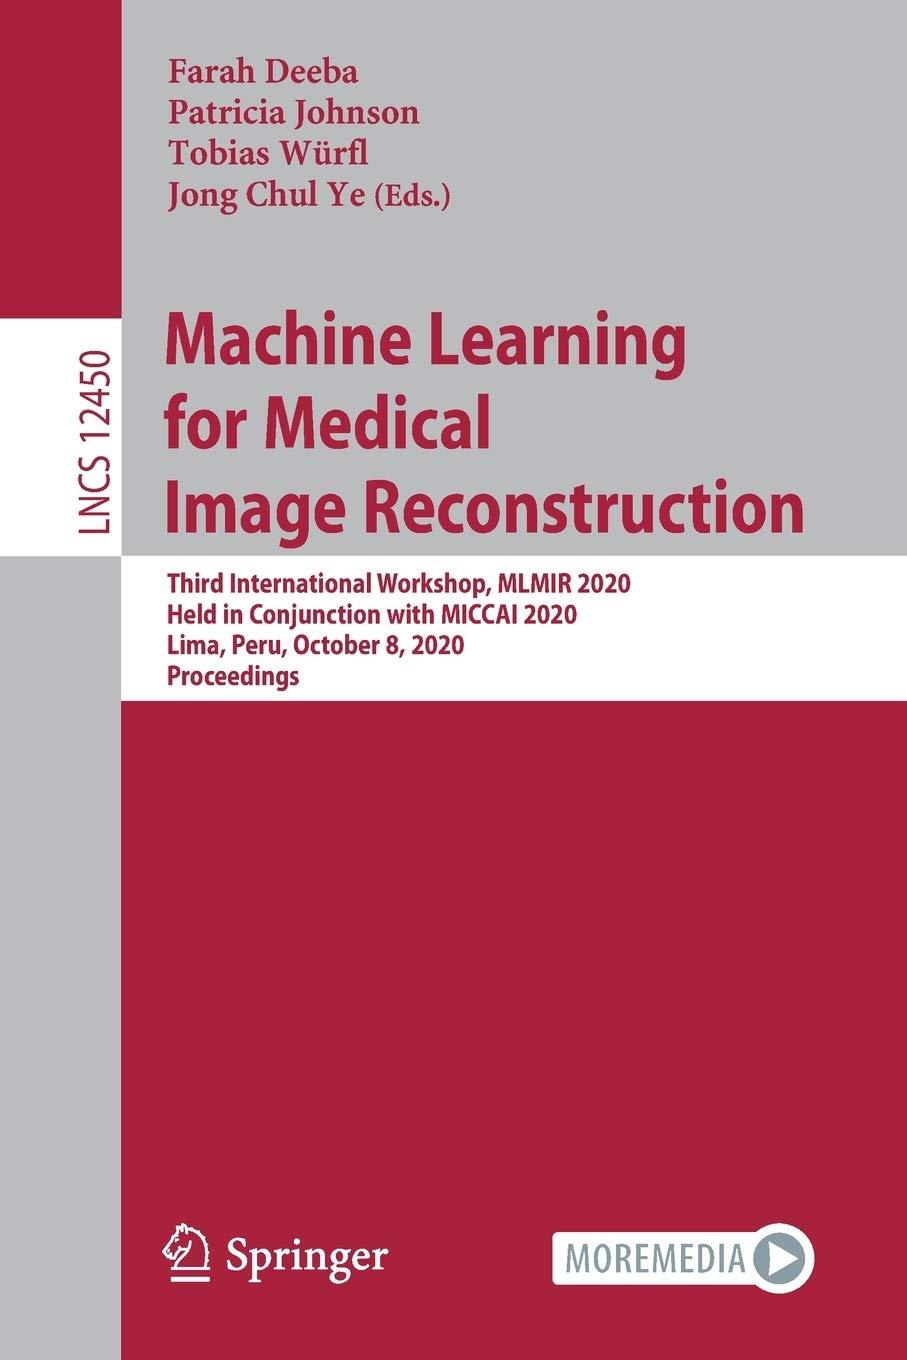 Machine Learning For Medical Image Reconstruction Third International Workshop  MLMIR 2020  Held In Conjunction With MICCAI 2020  Lima  Peru